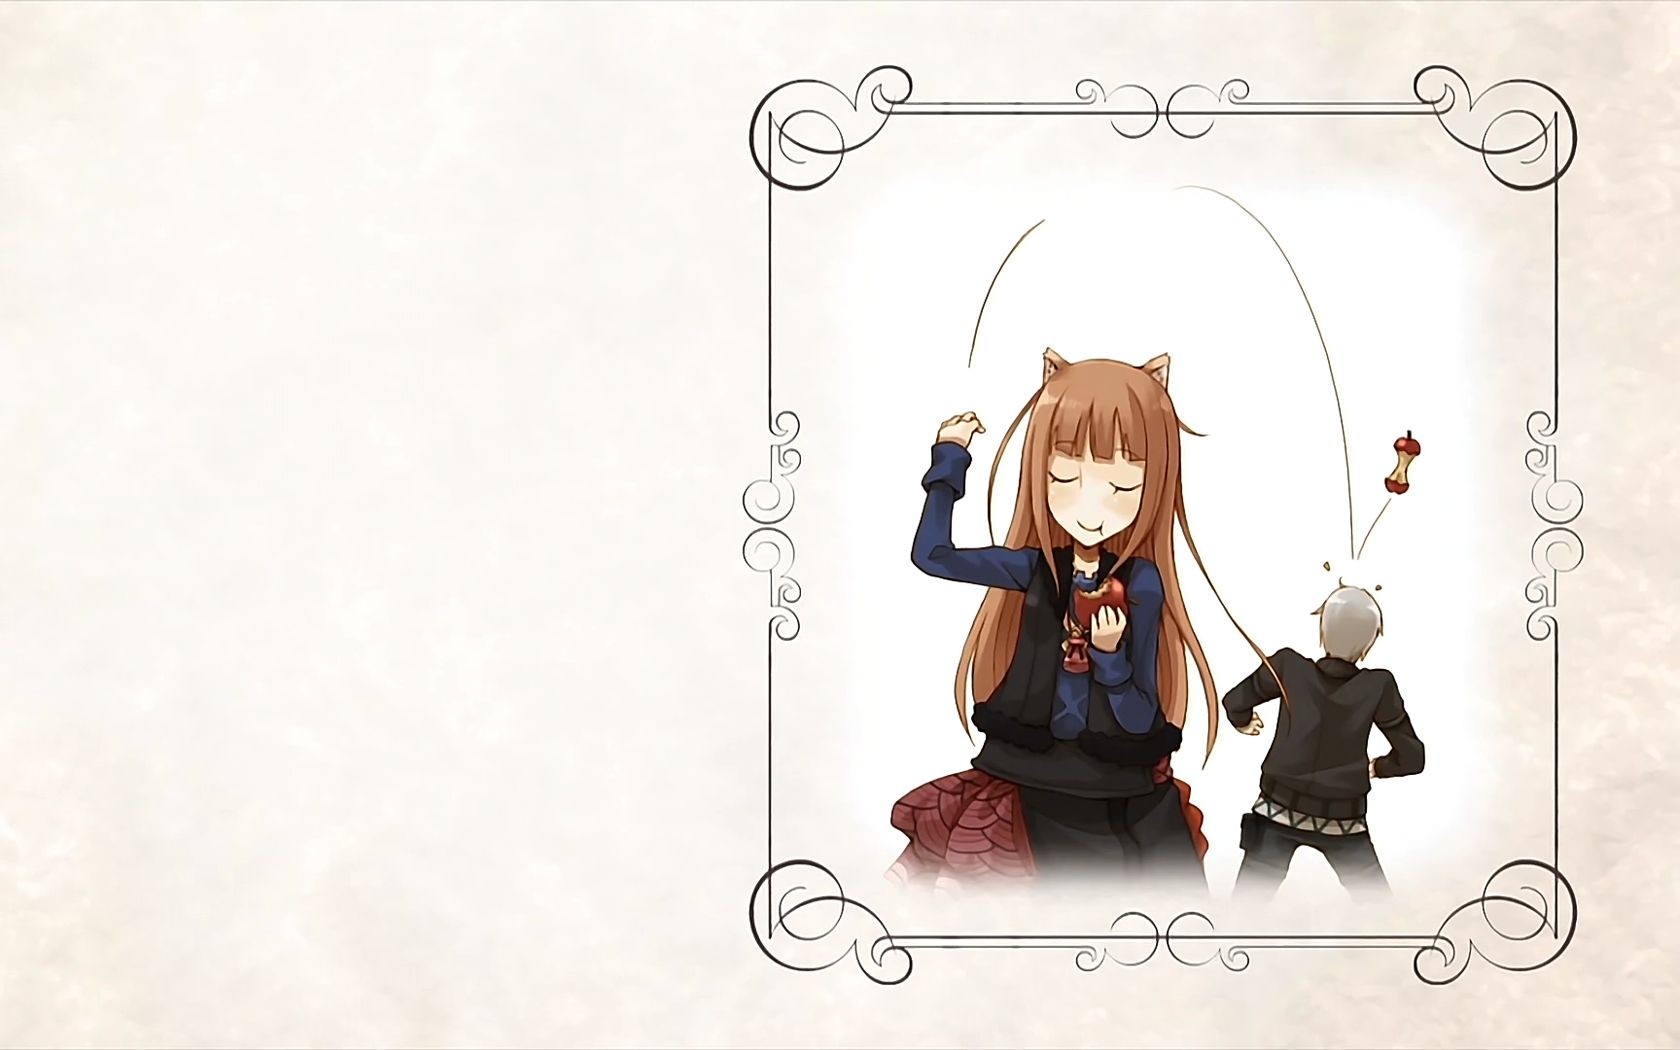 Spice And Wolf Holo Spice And Wolf Apples Lawrence Kraft Anime Okamimimi Anime Girls 1680x1050